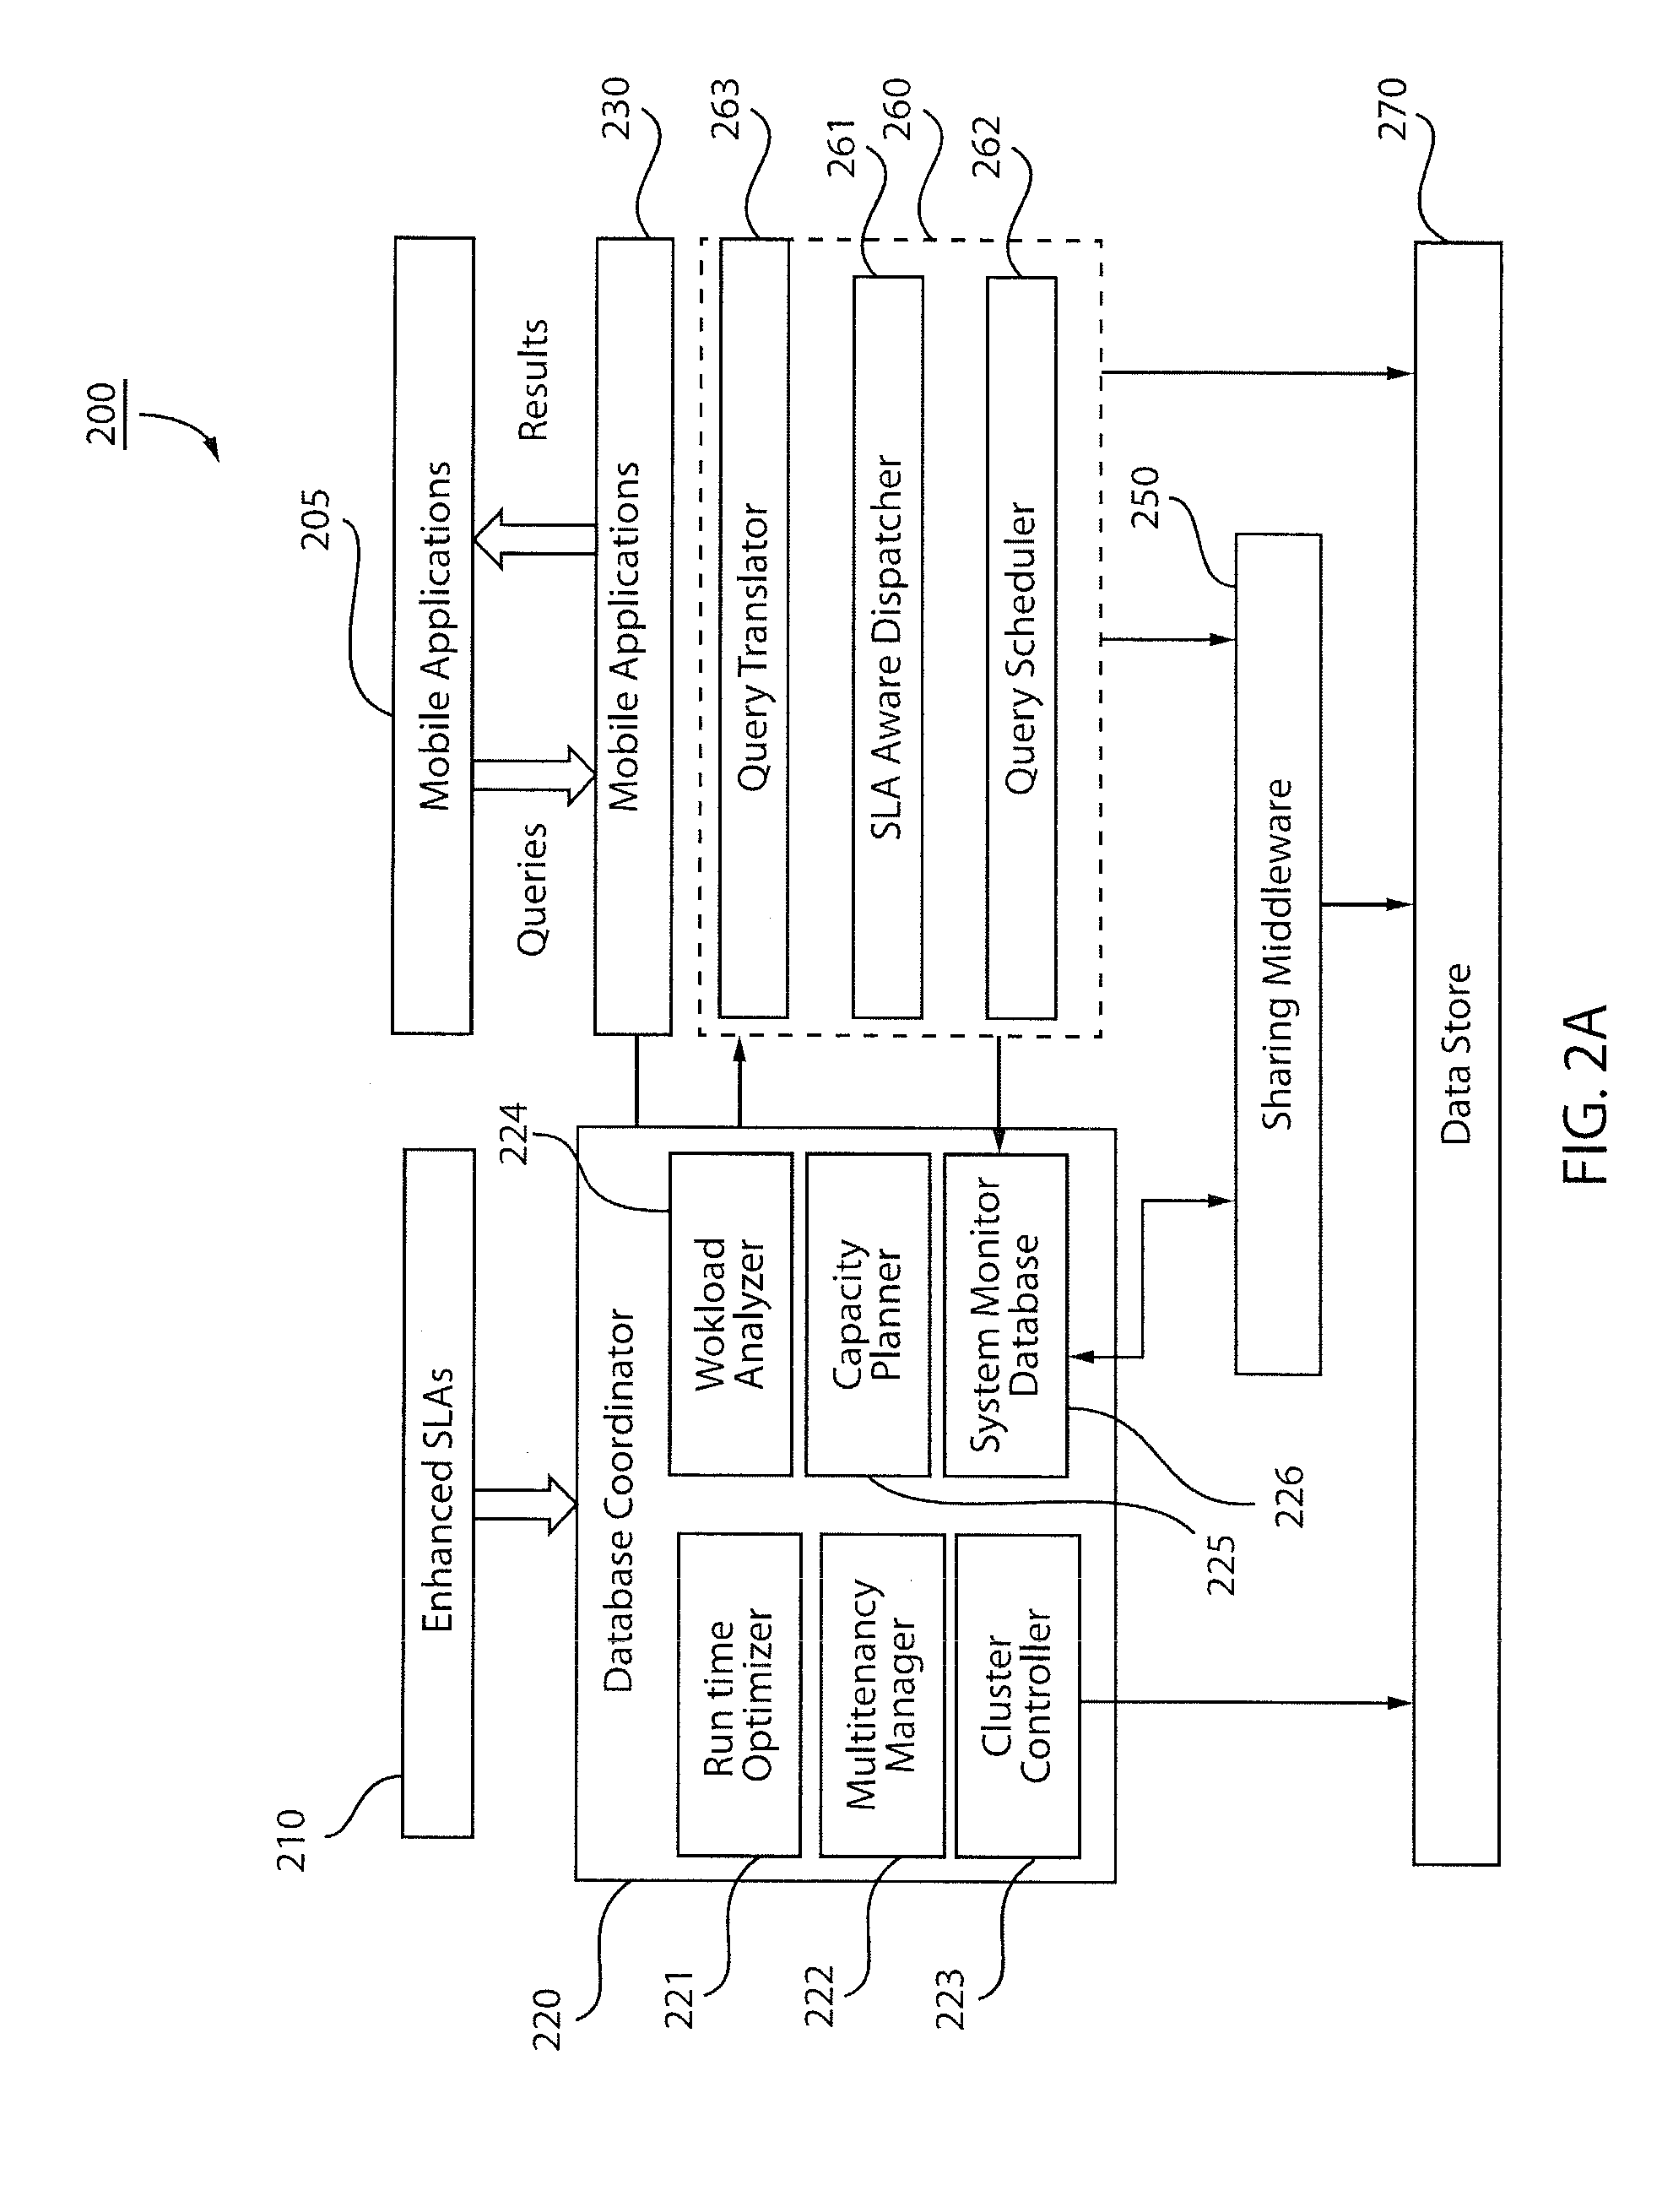 System and method for cloud infrastructure data sharing through a uniform communication framework